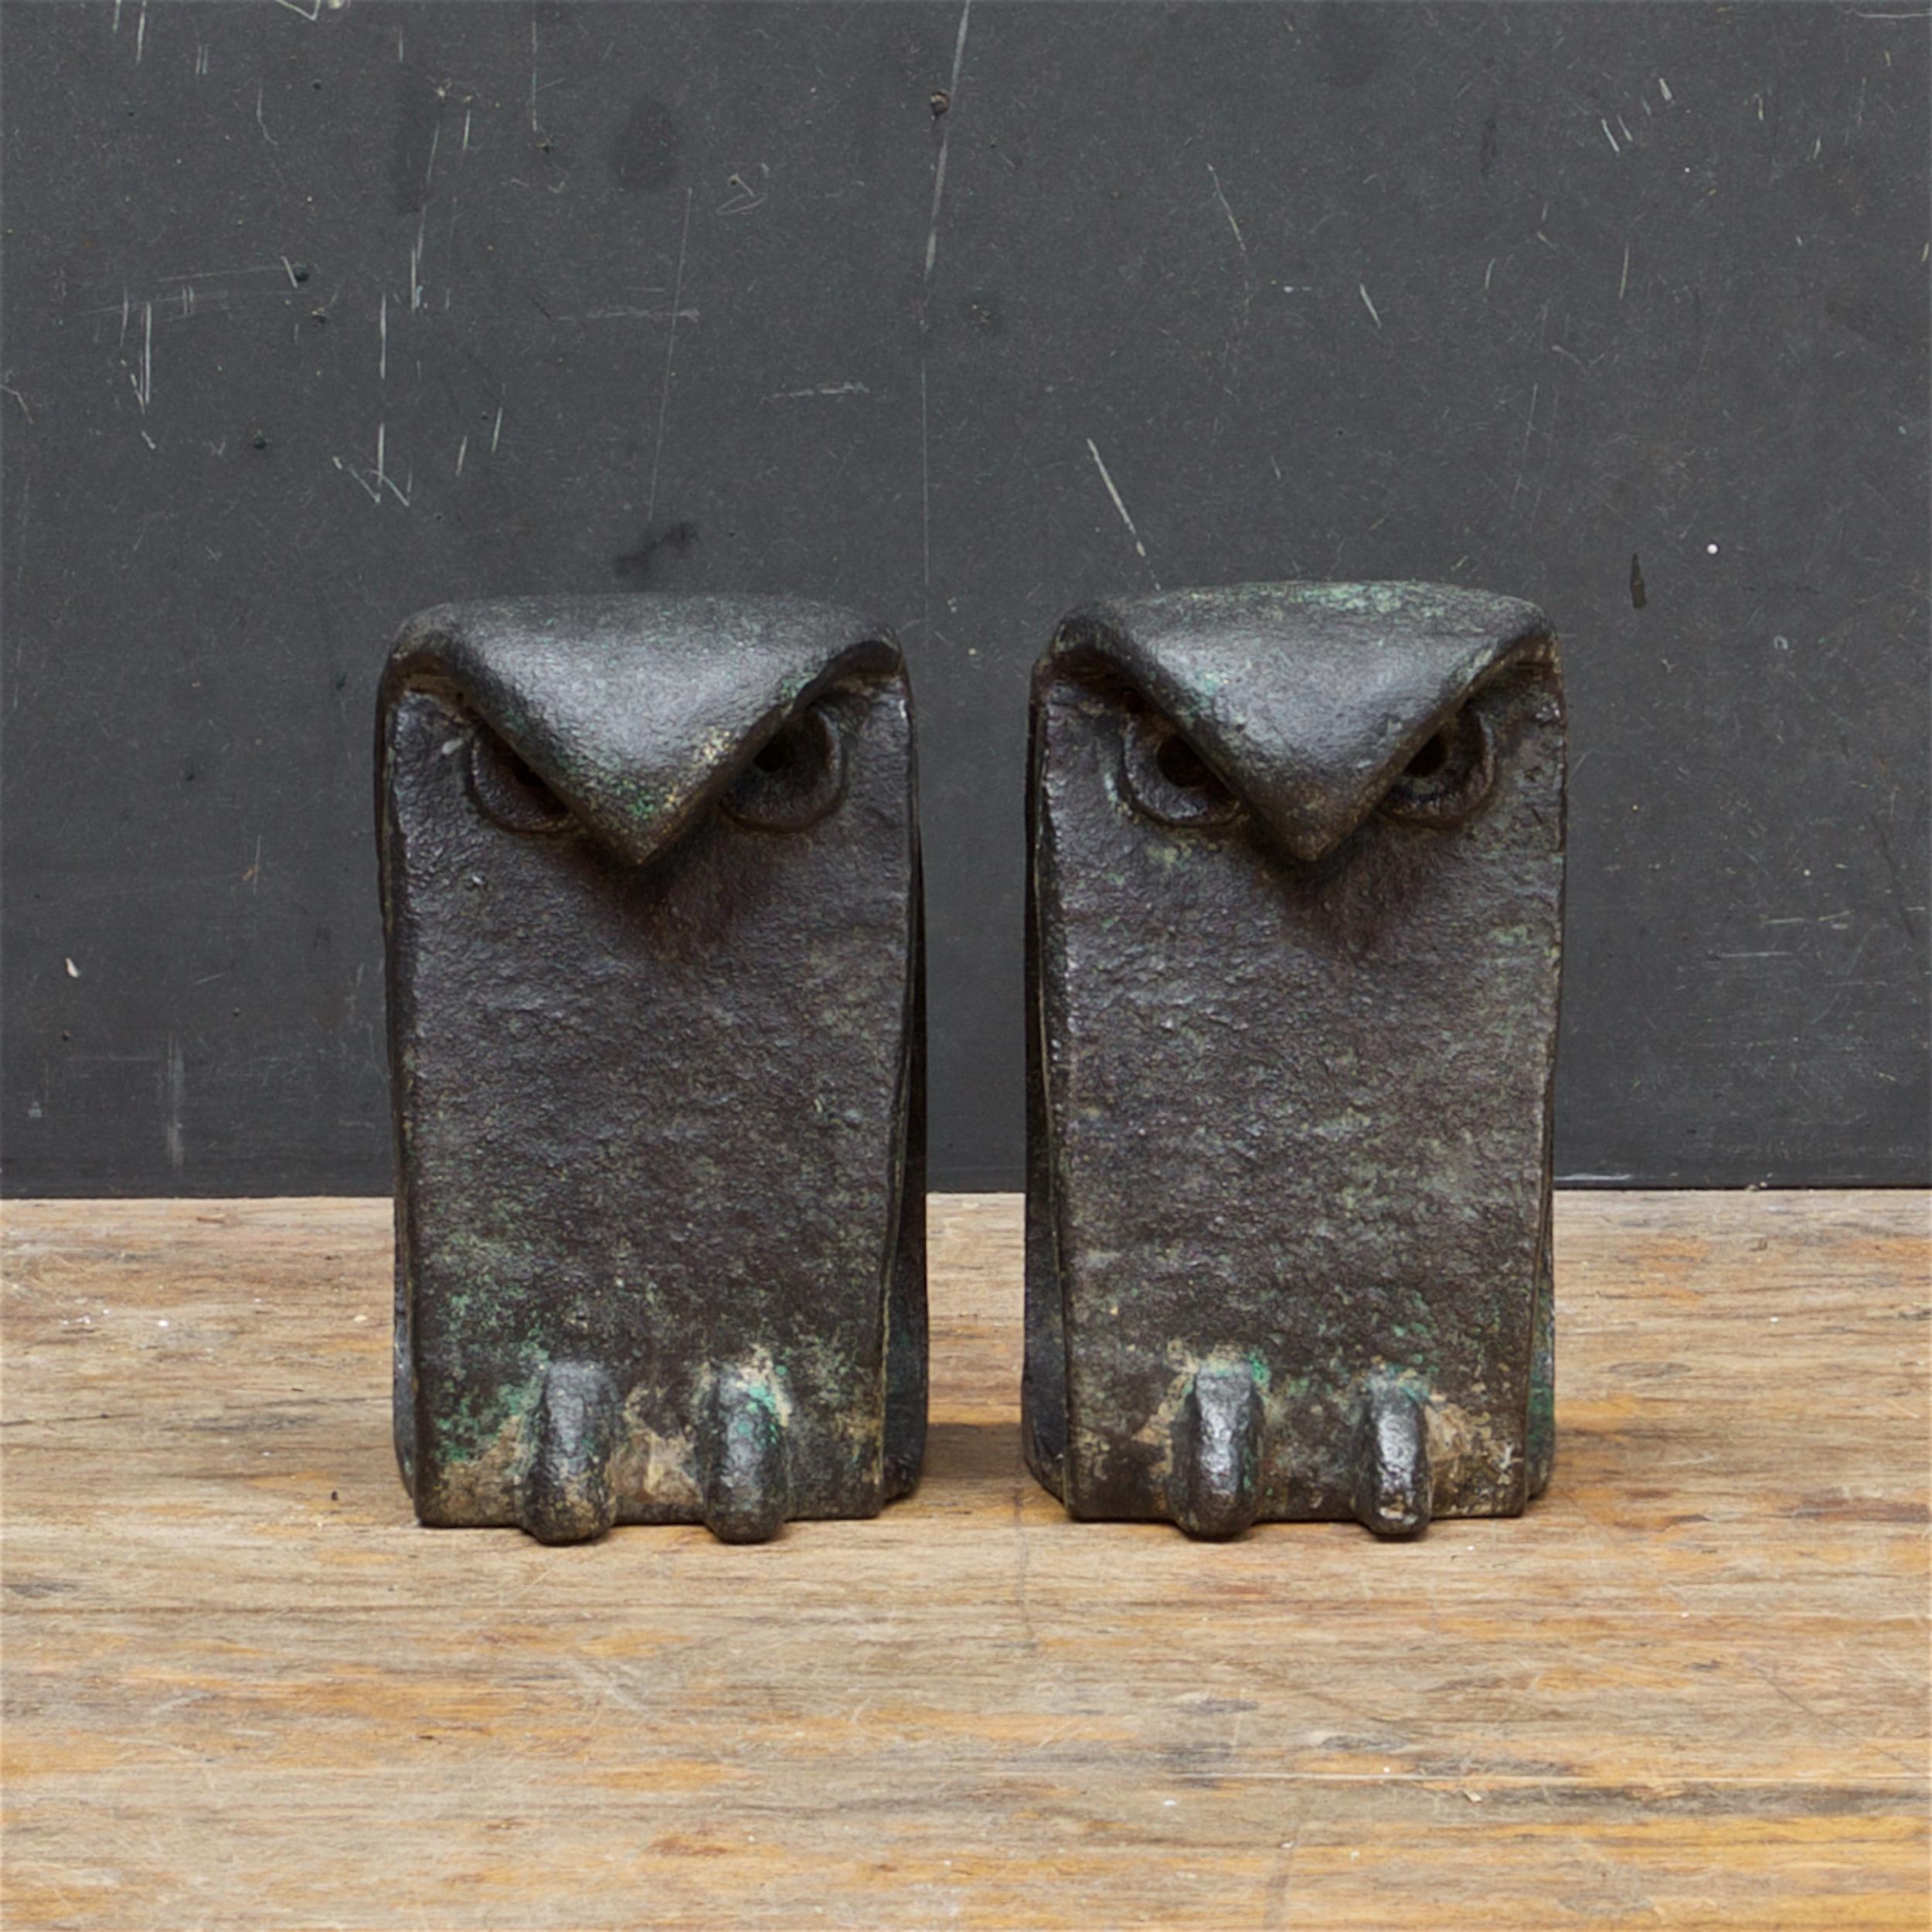 Pair of heavy welded metal abstract bird sculptures, Minimalist in design and creation. Some remnants of greenish and gold patina on dark metal. Made in Japan. Deep cleaned, and polished. 

Each bird is 6 inches high and weighs 3.35 lbs.